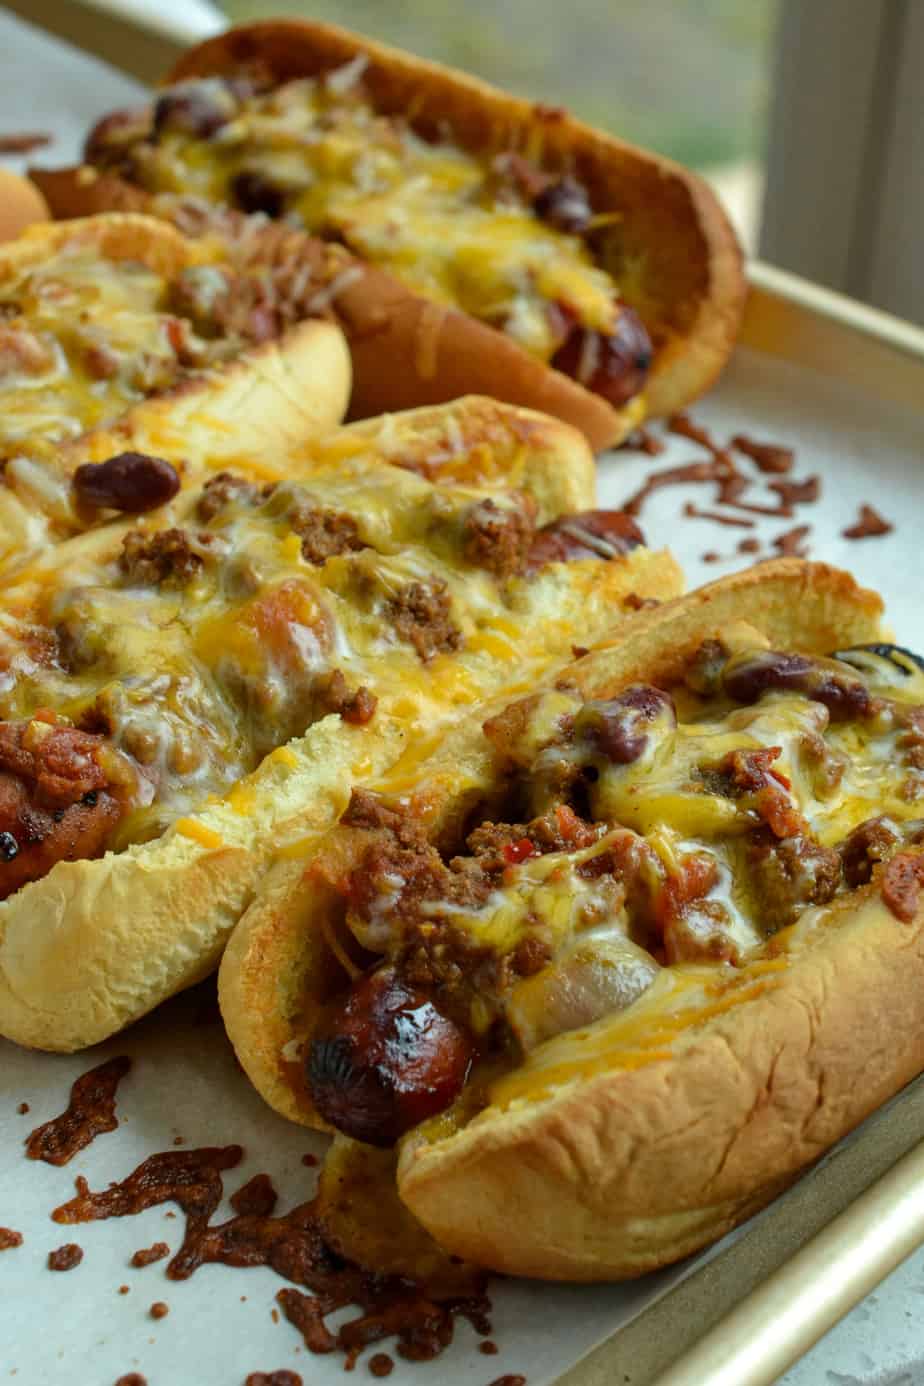 what goes good with chili dogs